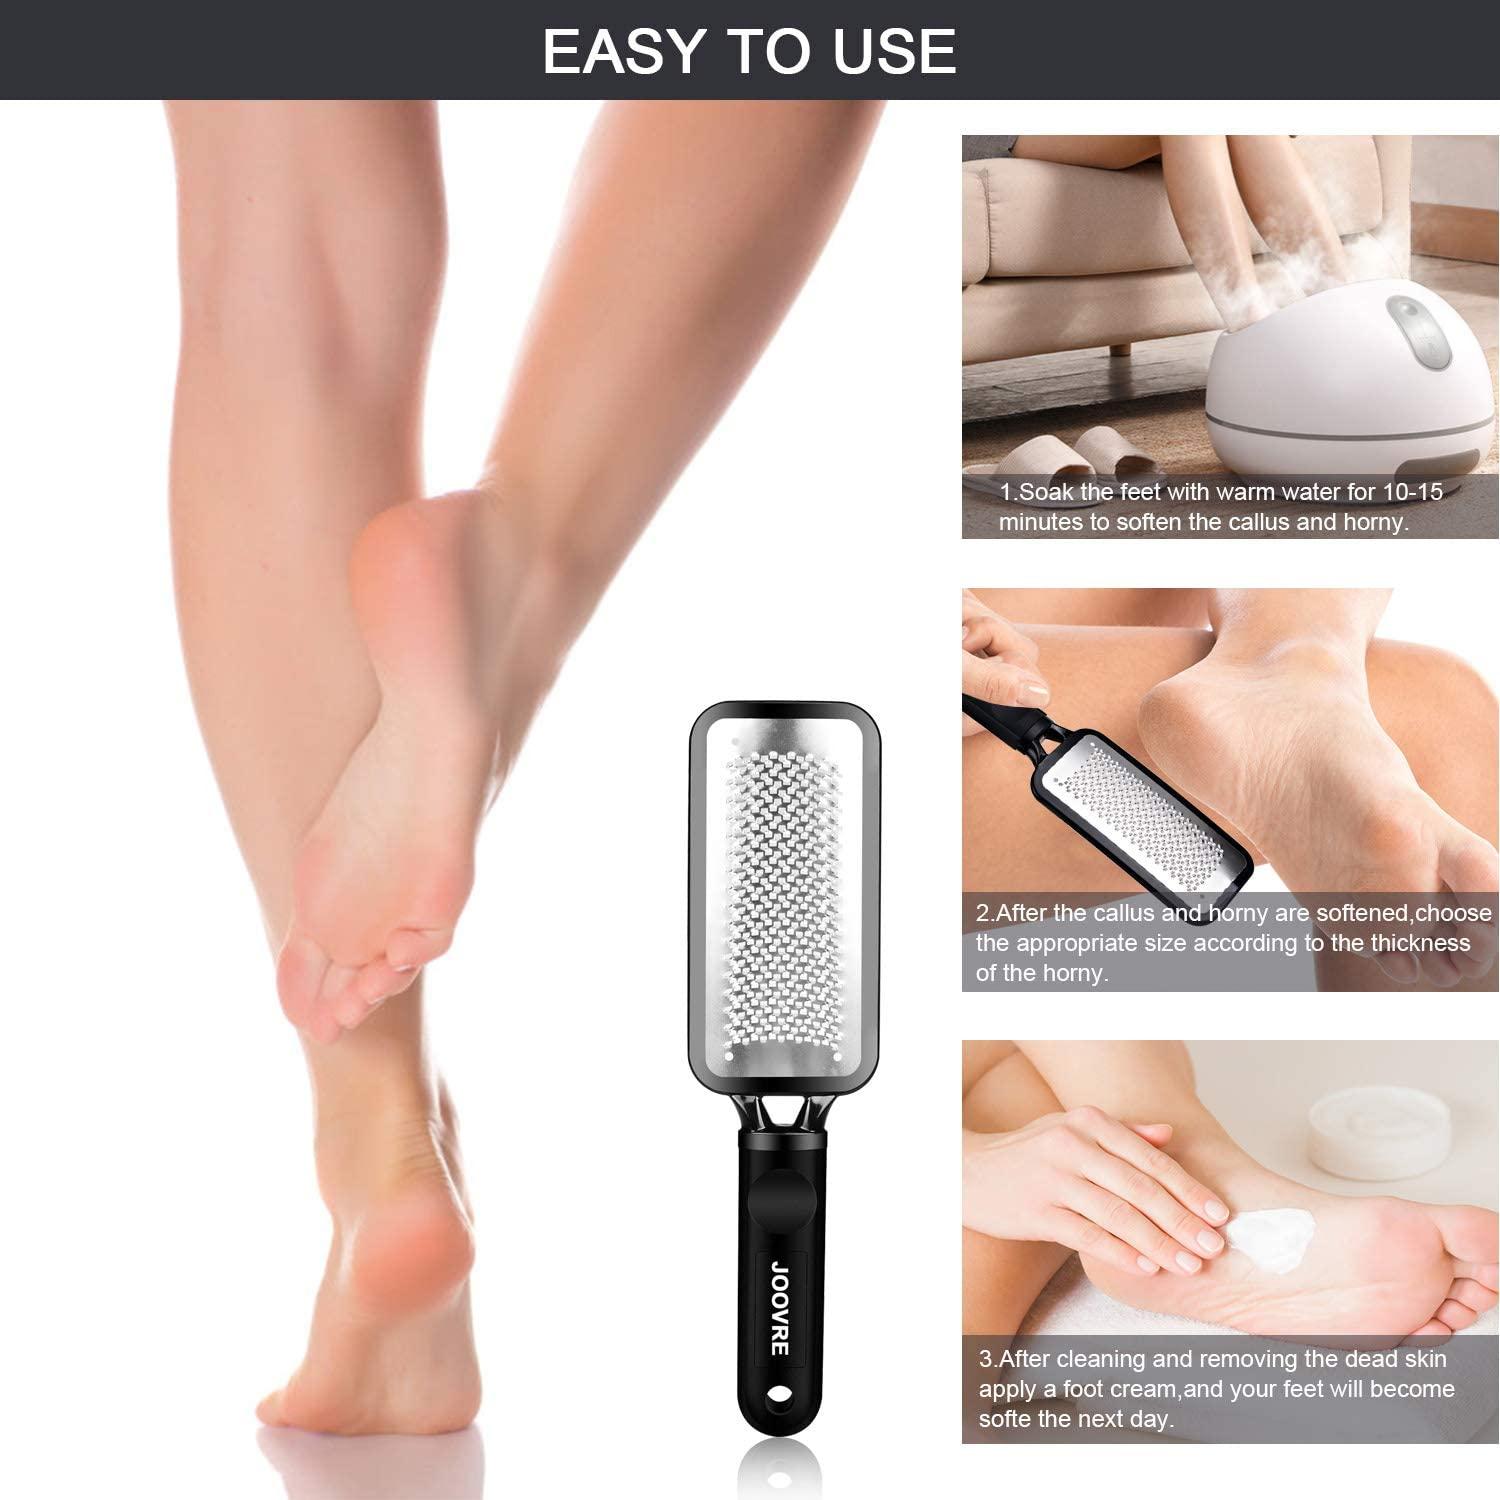 15 Best Foot Files That Are Incredible Callus-removers for Your Feet